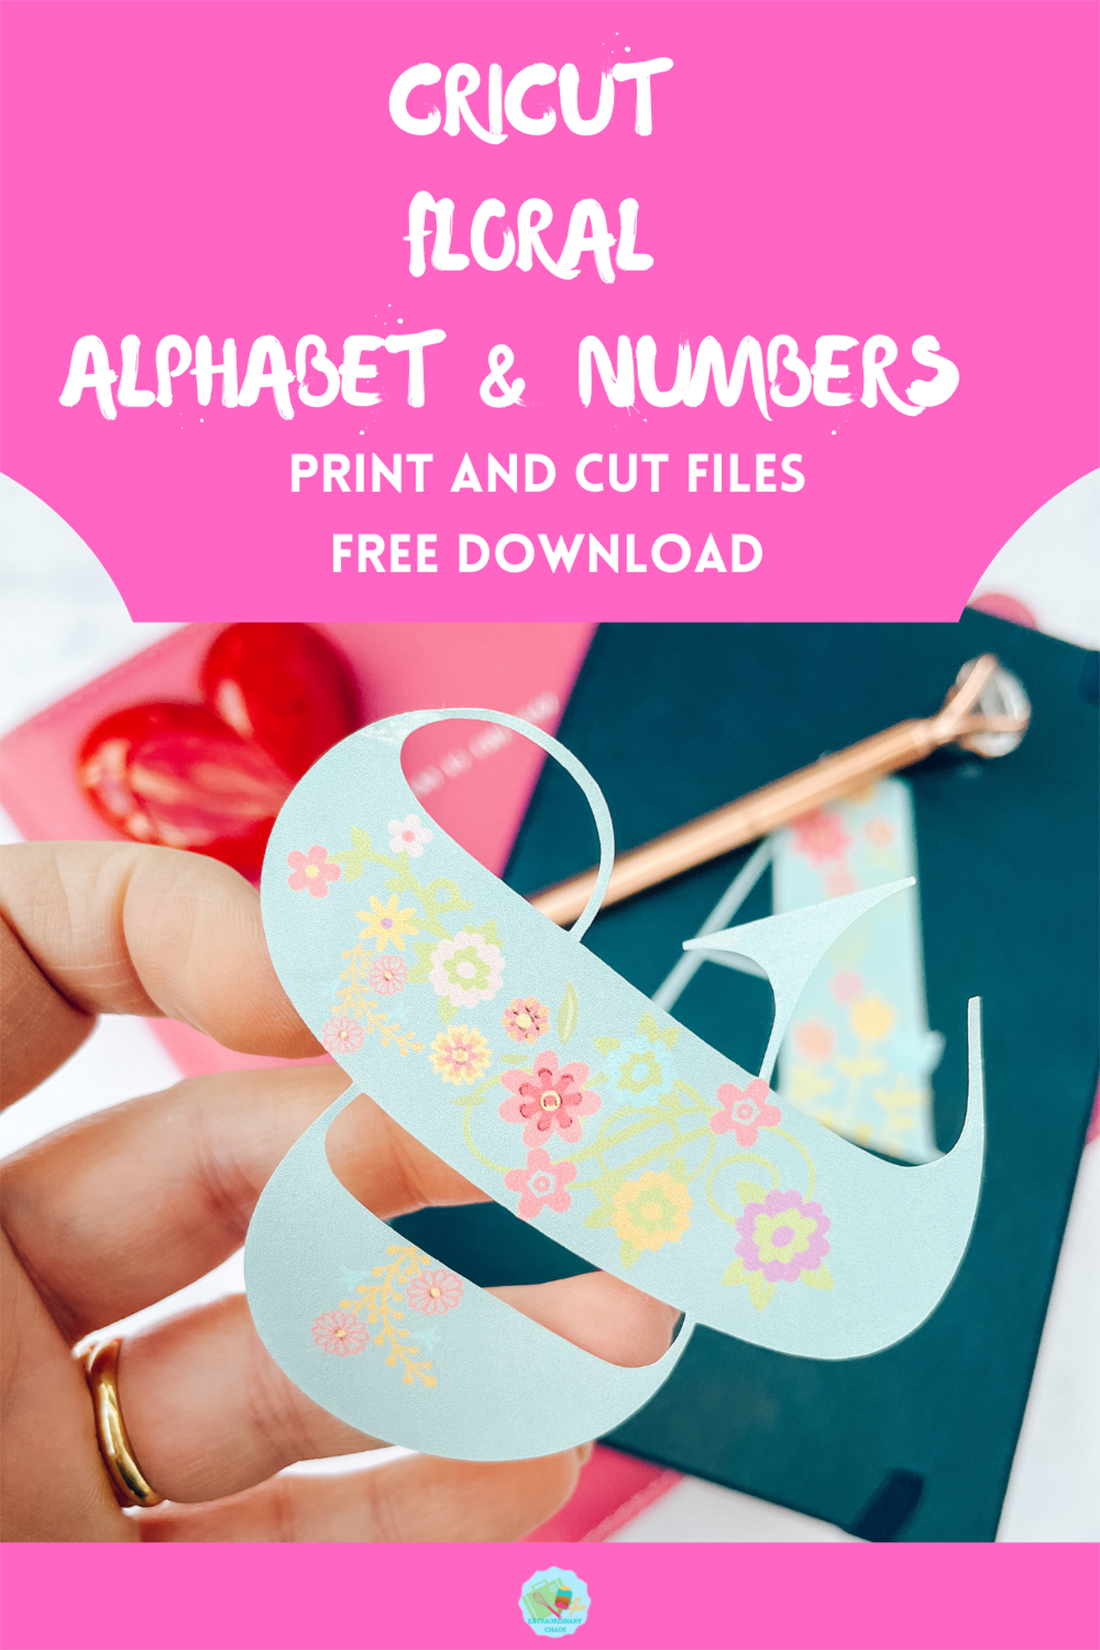 Free download for a Cricut Flowery Alphabet and numbers for Crafting and scrapbooking